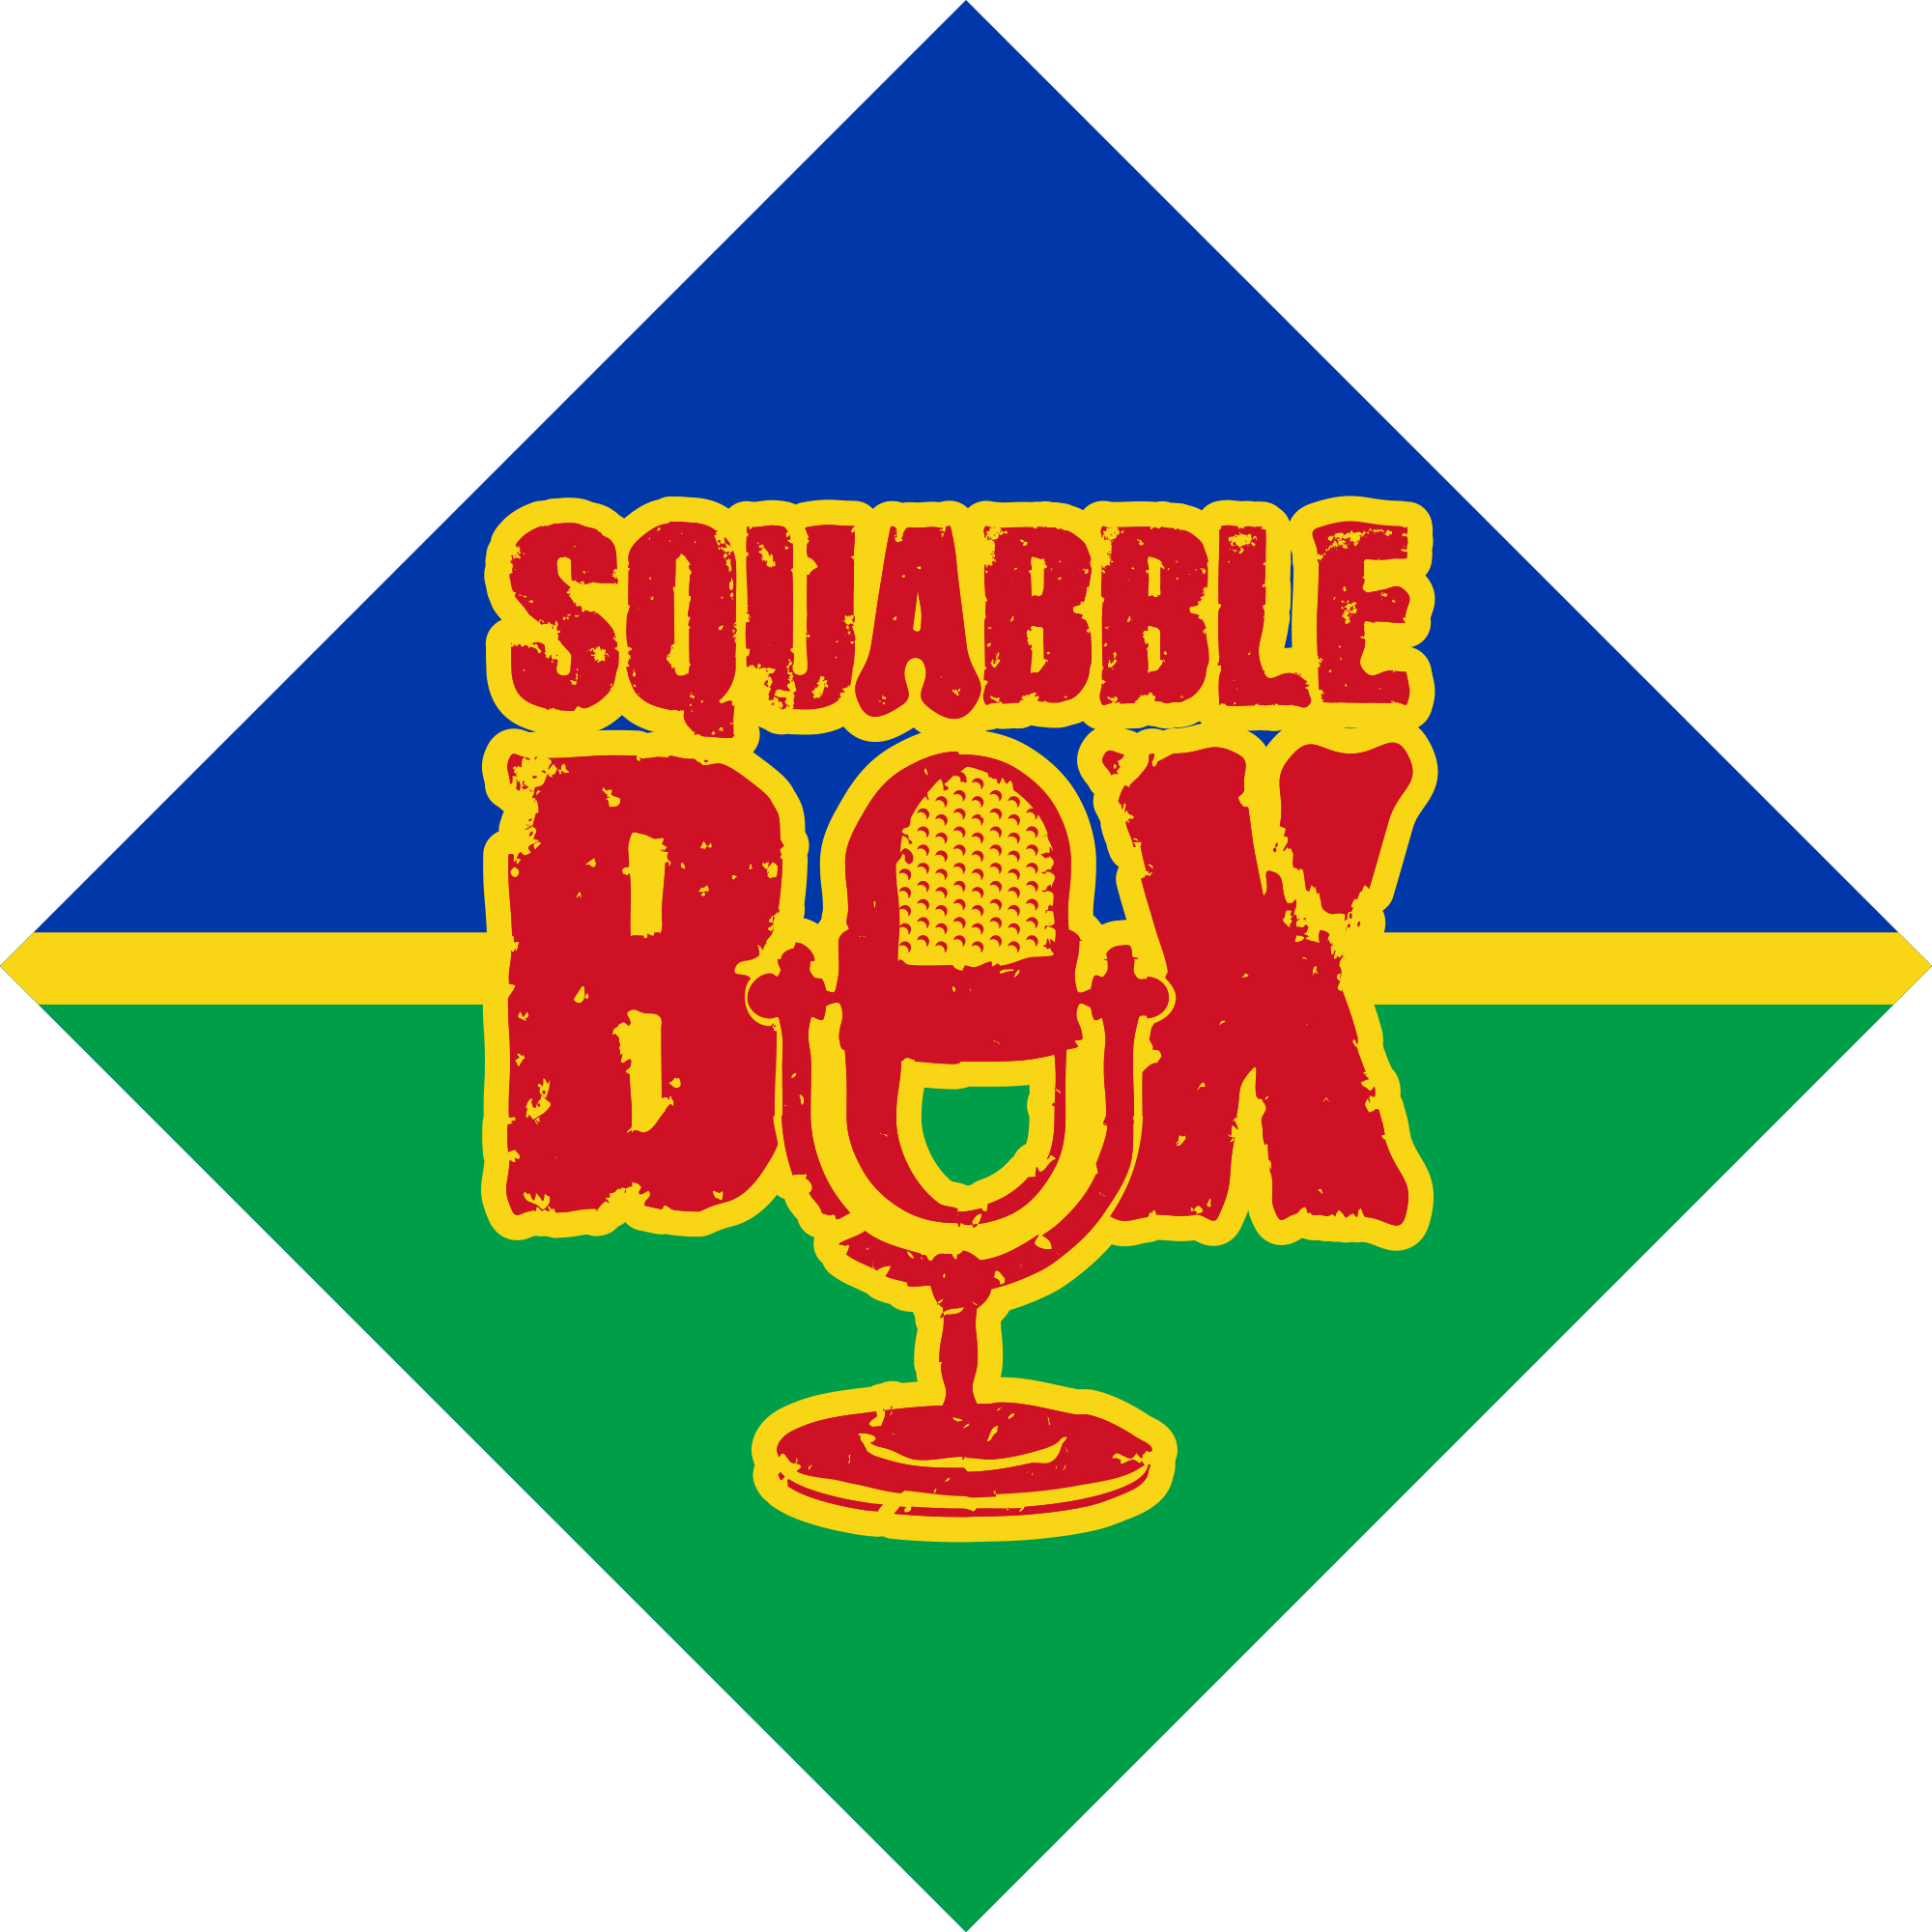 SquabbleBox Episode 89 - 26th February 2017 (Arts & Crafts + Sarah Anderson/Clic Sargent Interview)